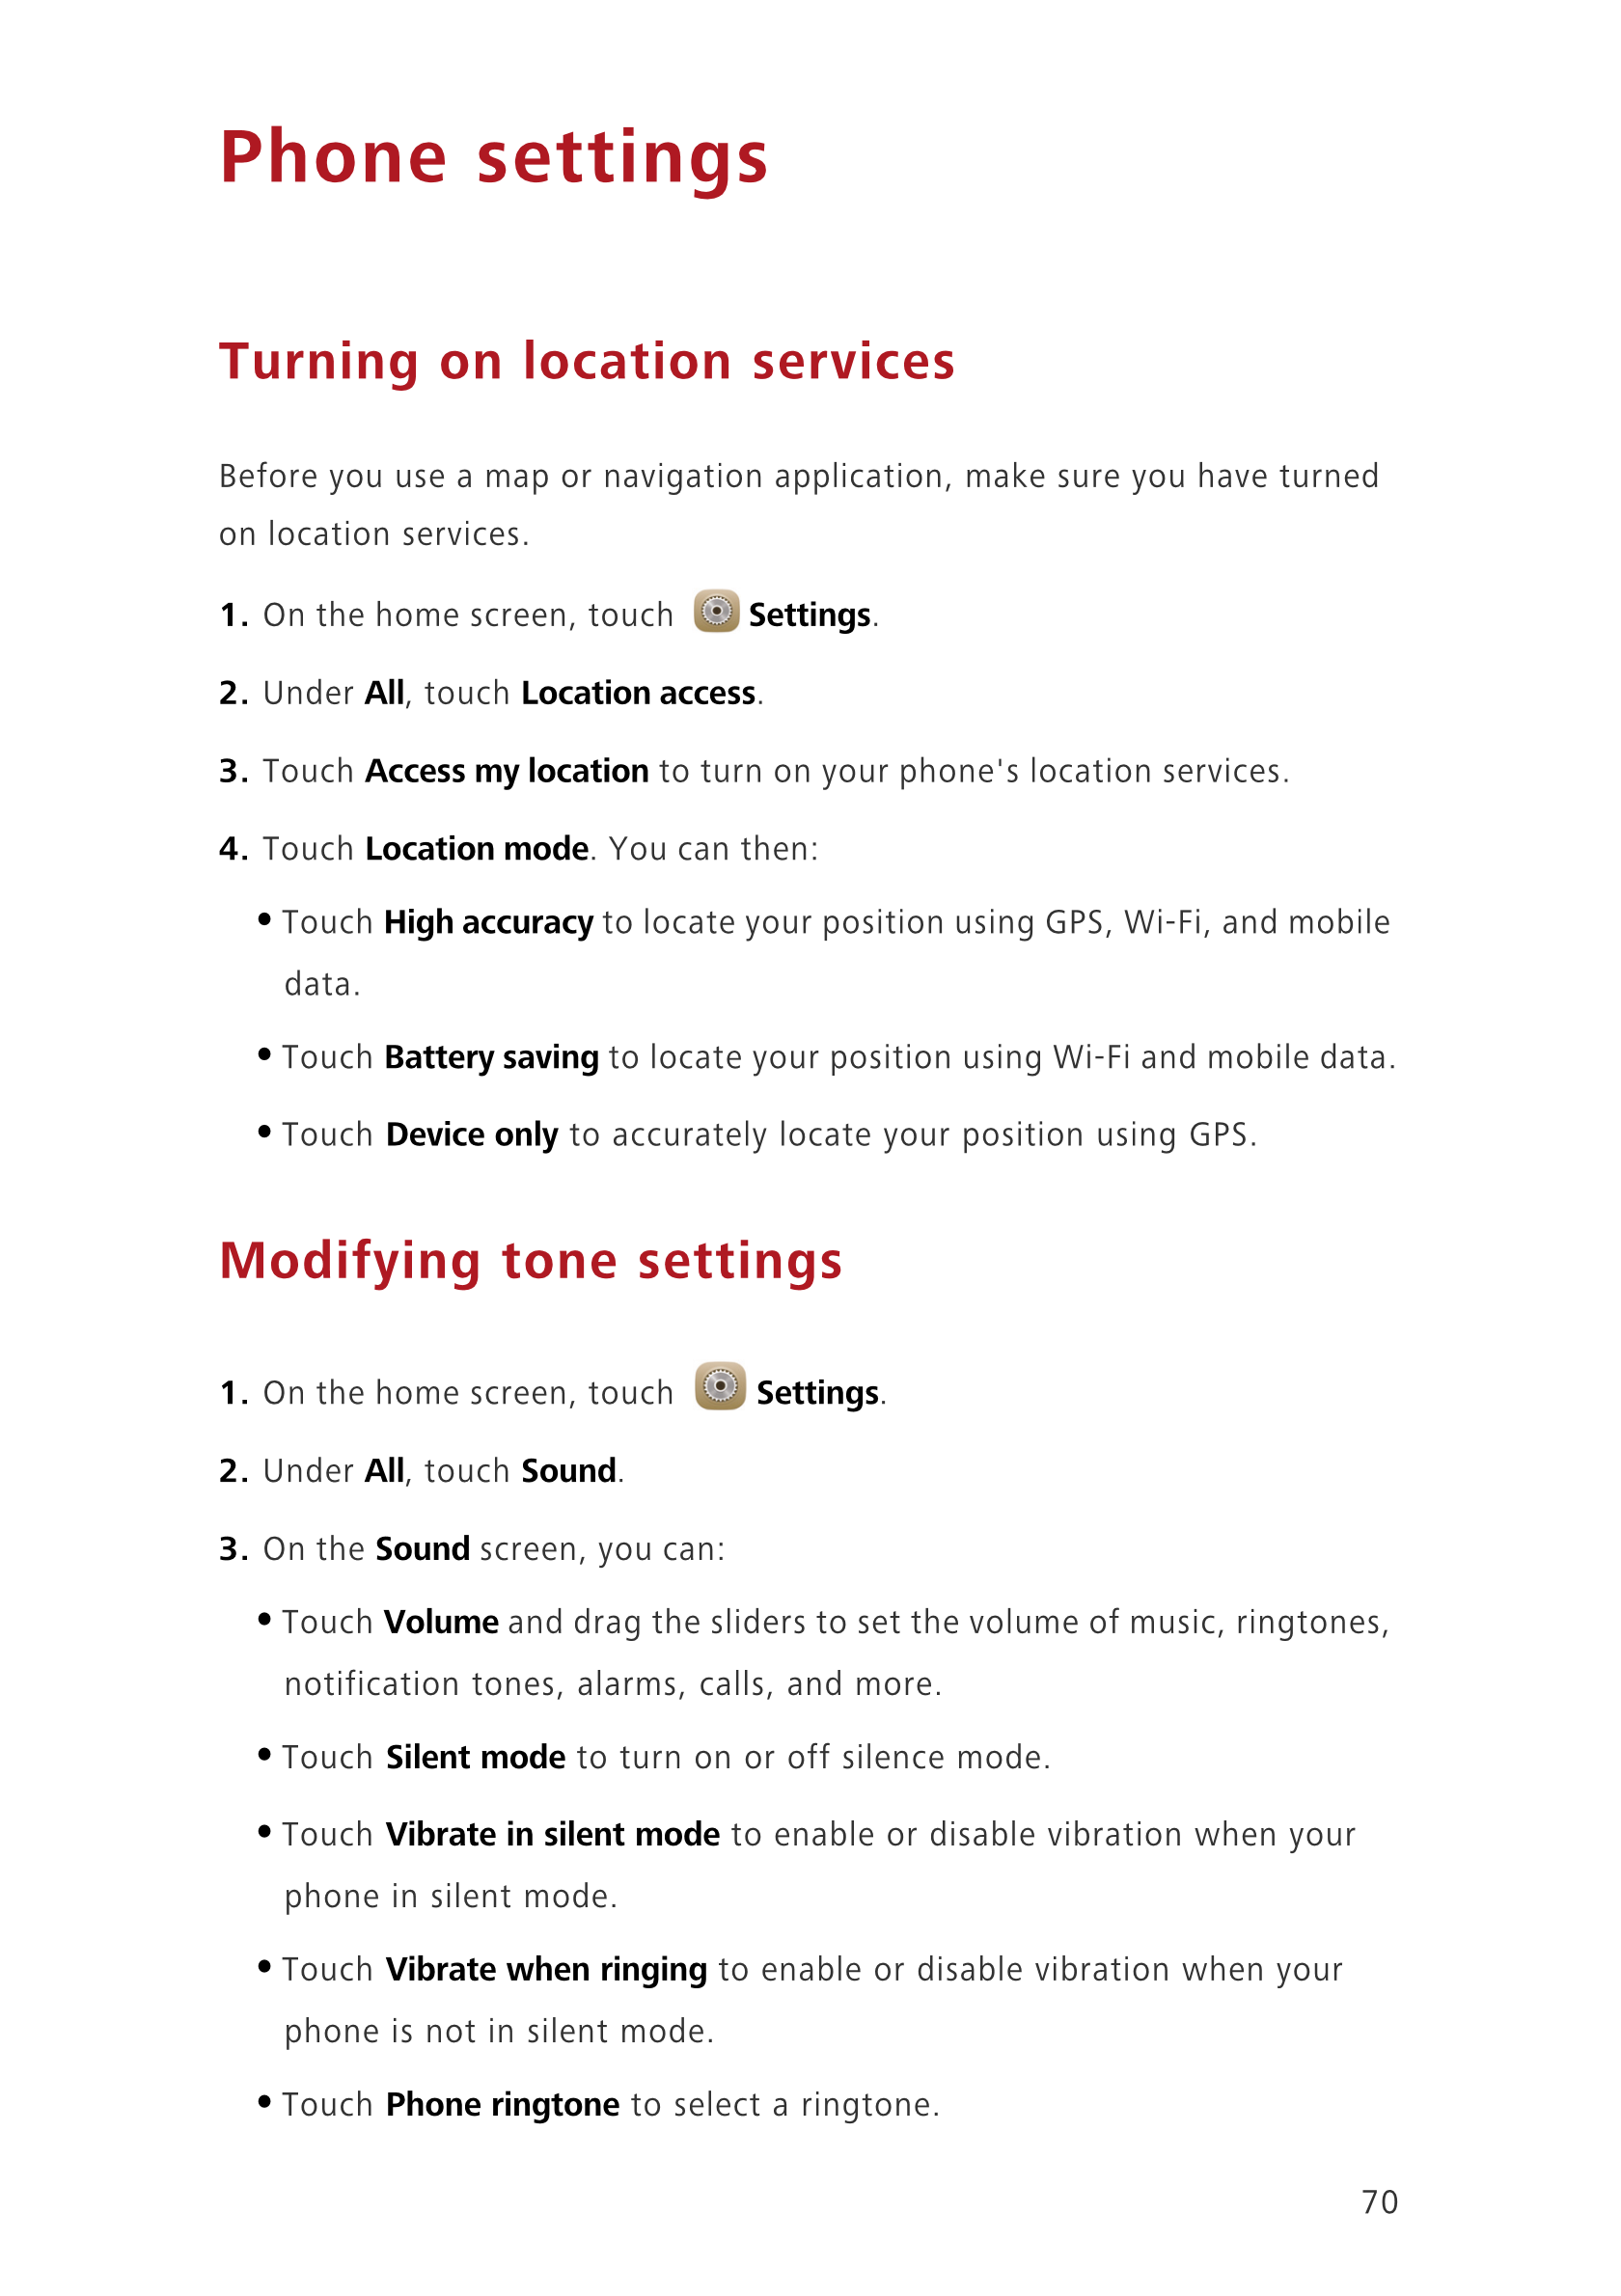 Phone settings
Turning on location services
Before you use a map or navigation application, make sure you have turned 
on locati